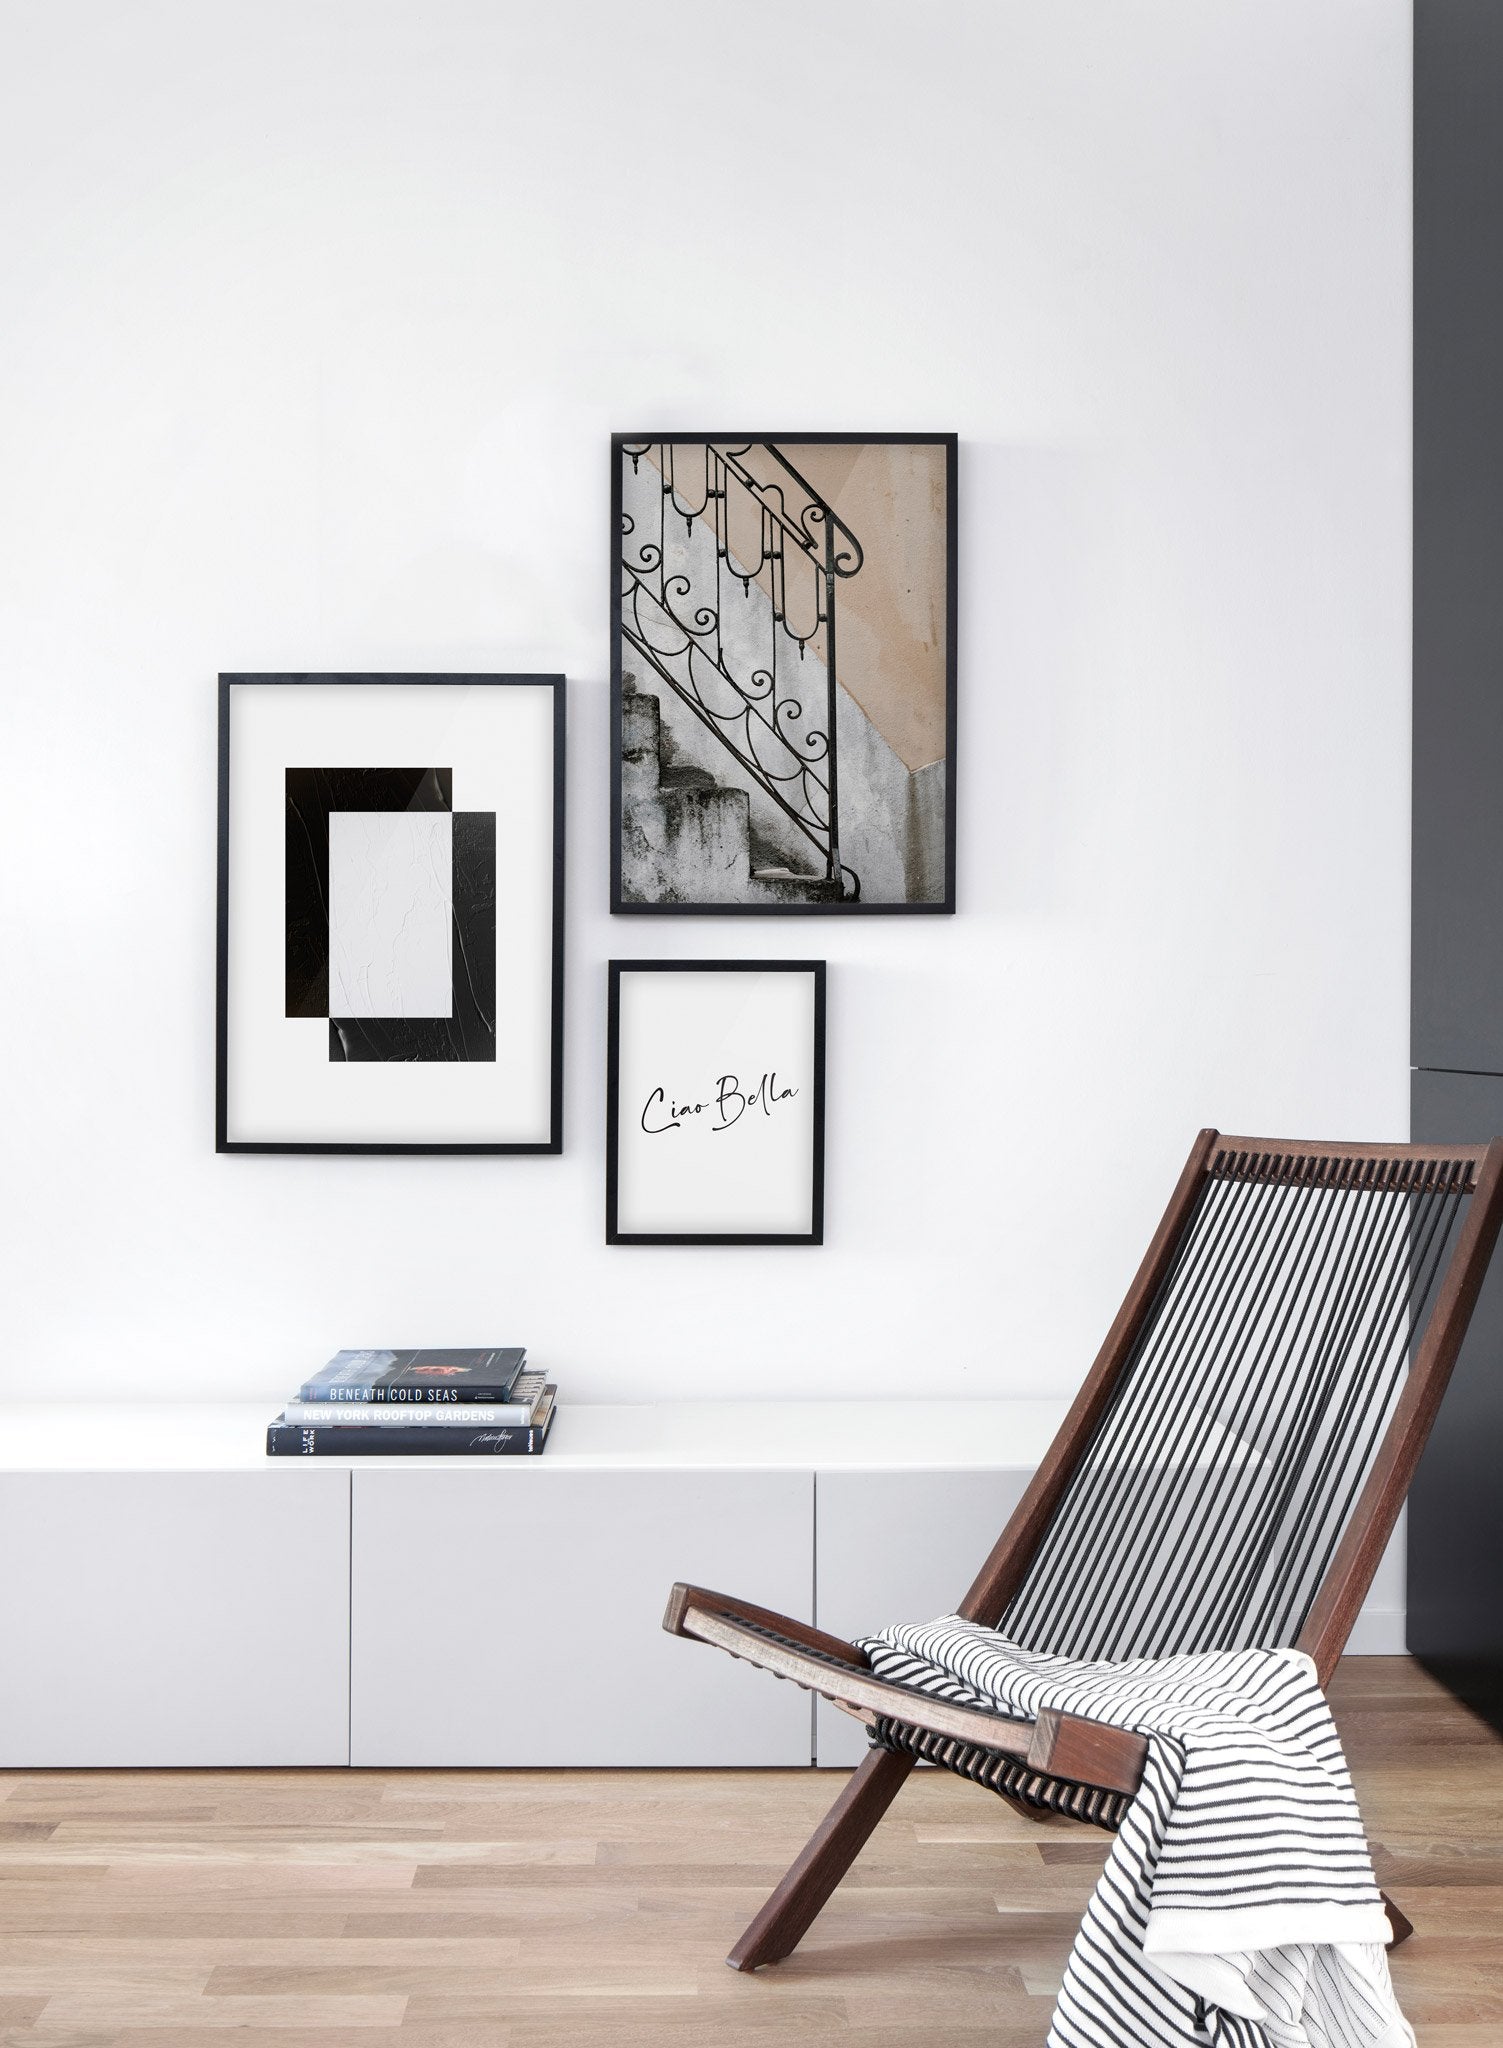 Minimalist design poster by Opposite Wall with abstract illustration Frame Within A Frame - Living room with gallery wall trio